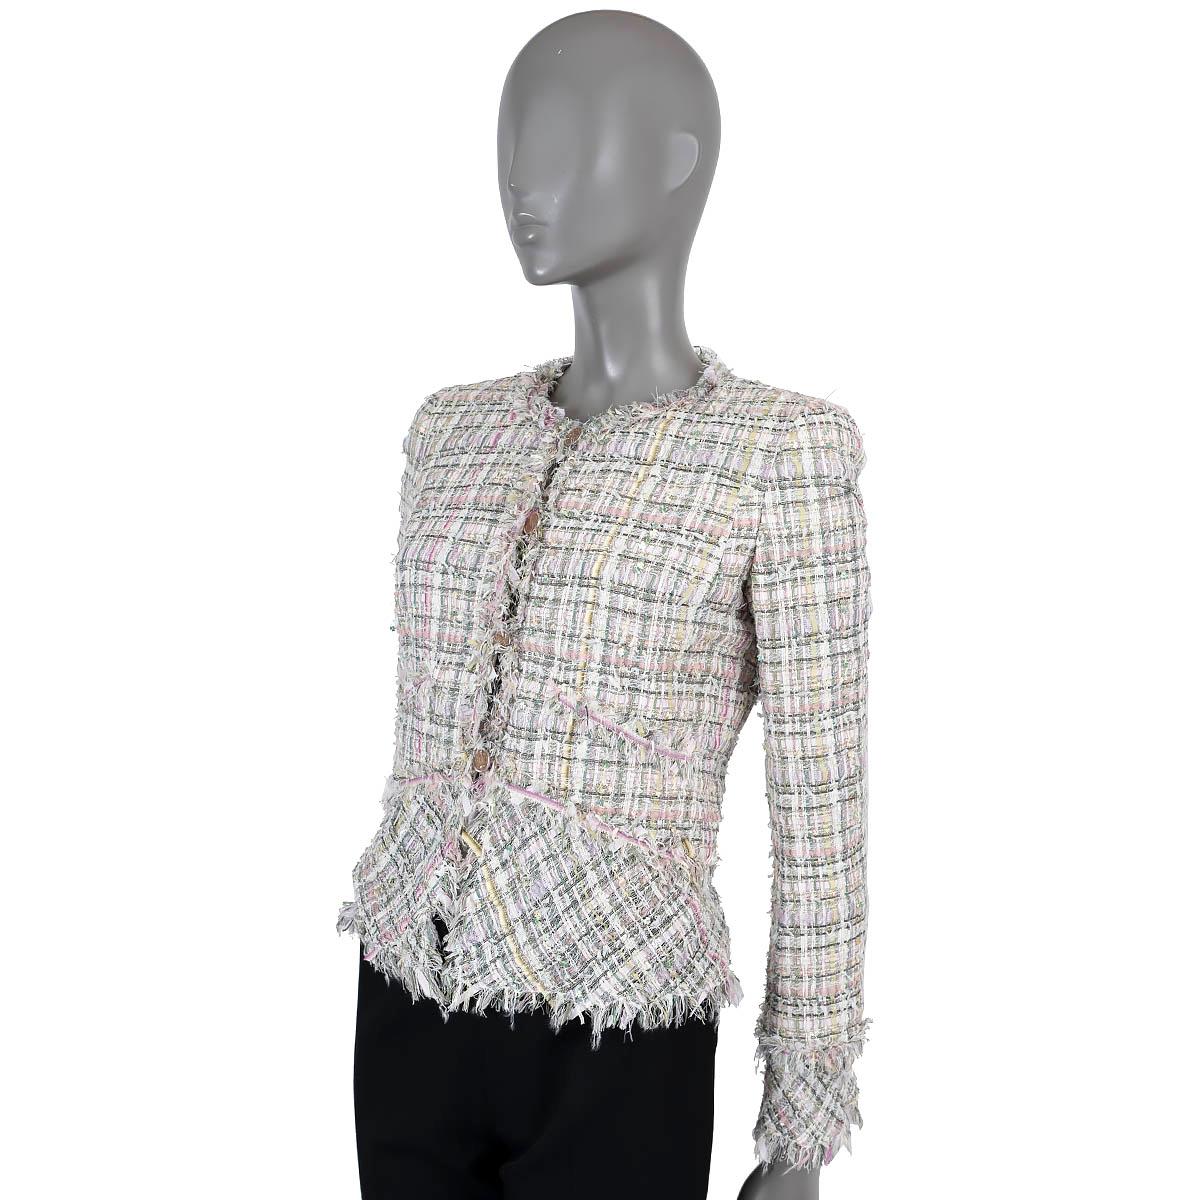 100% authentic Chanel collarless tweed jacket in various shades of green and pink viscose (34%), nylon (25%), acetate (10%), acrylic (10%), polyester (8%), silk (5%), wool (5%) and vinyon (3%). Features clover sequins through-out, fringe trims and